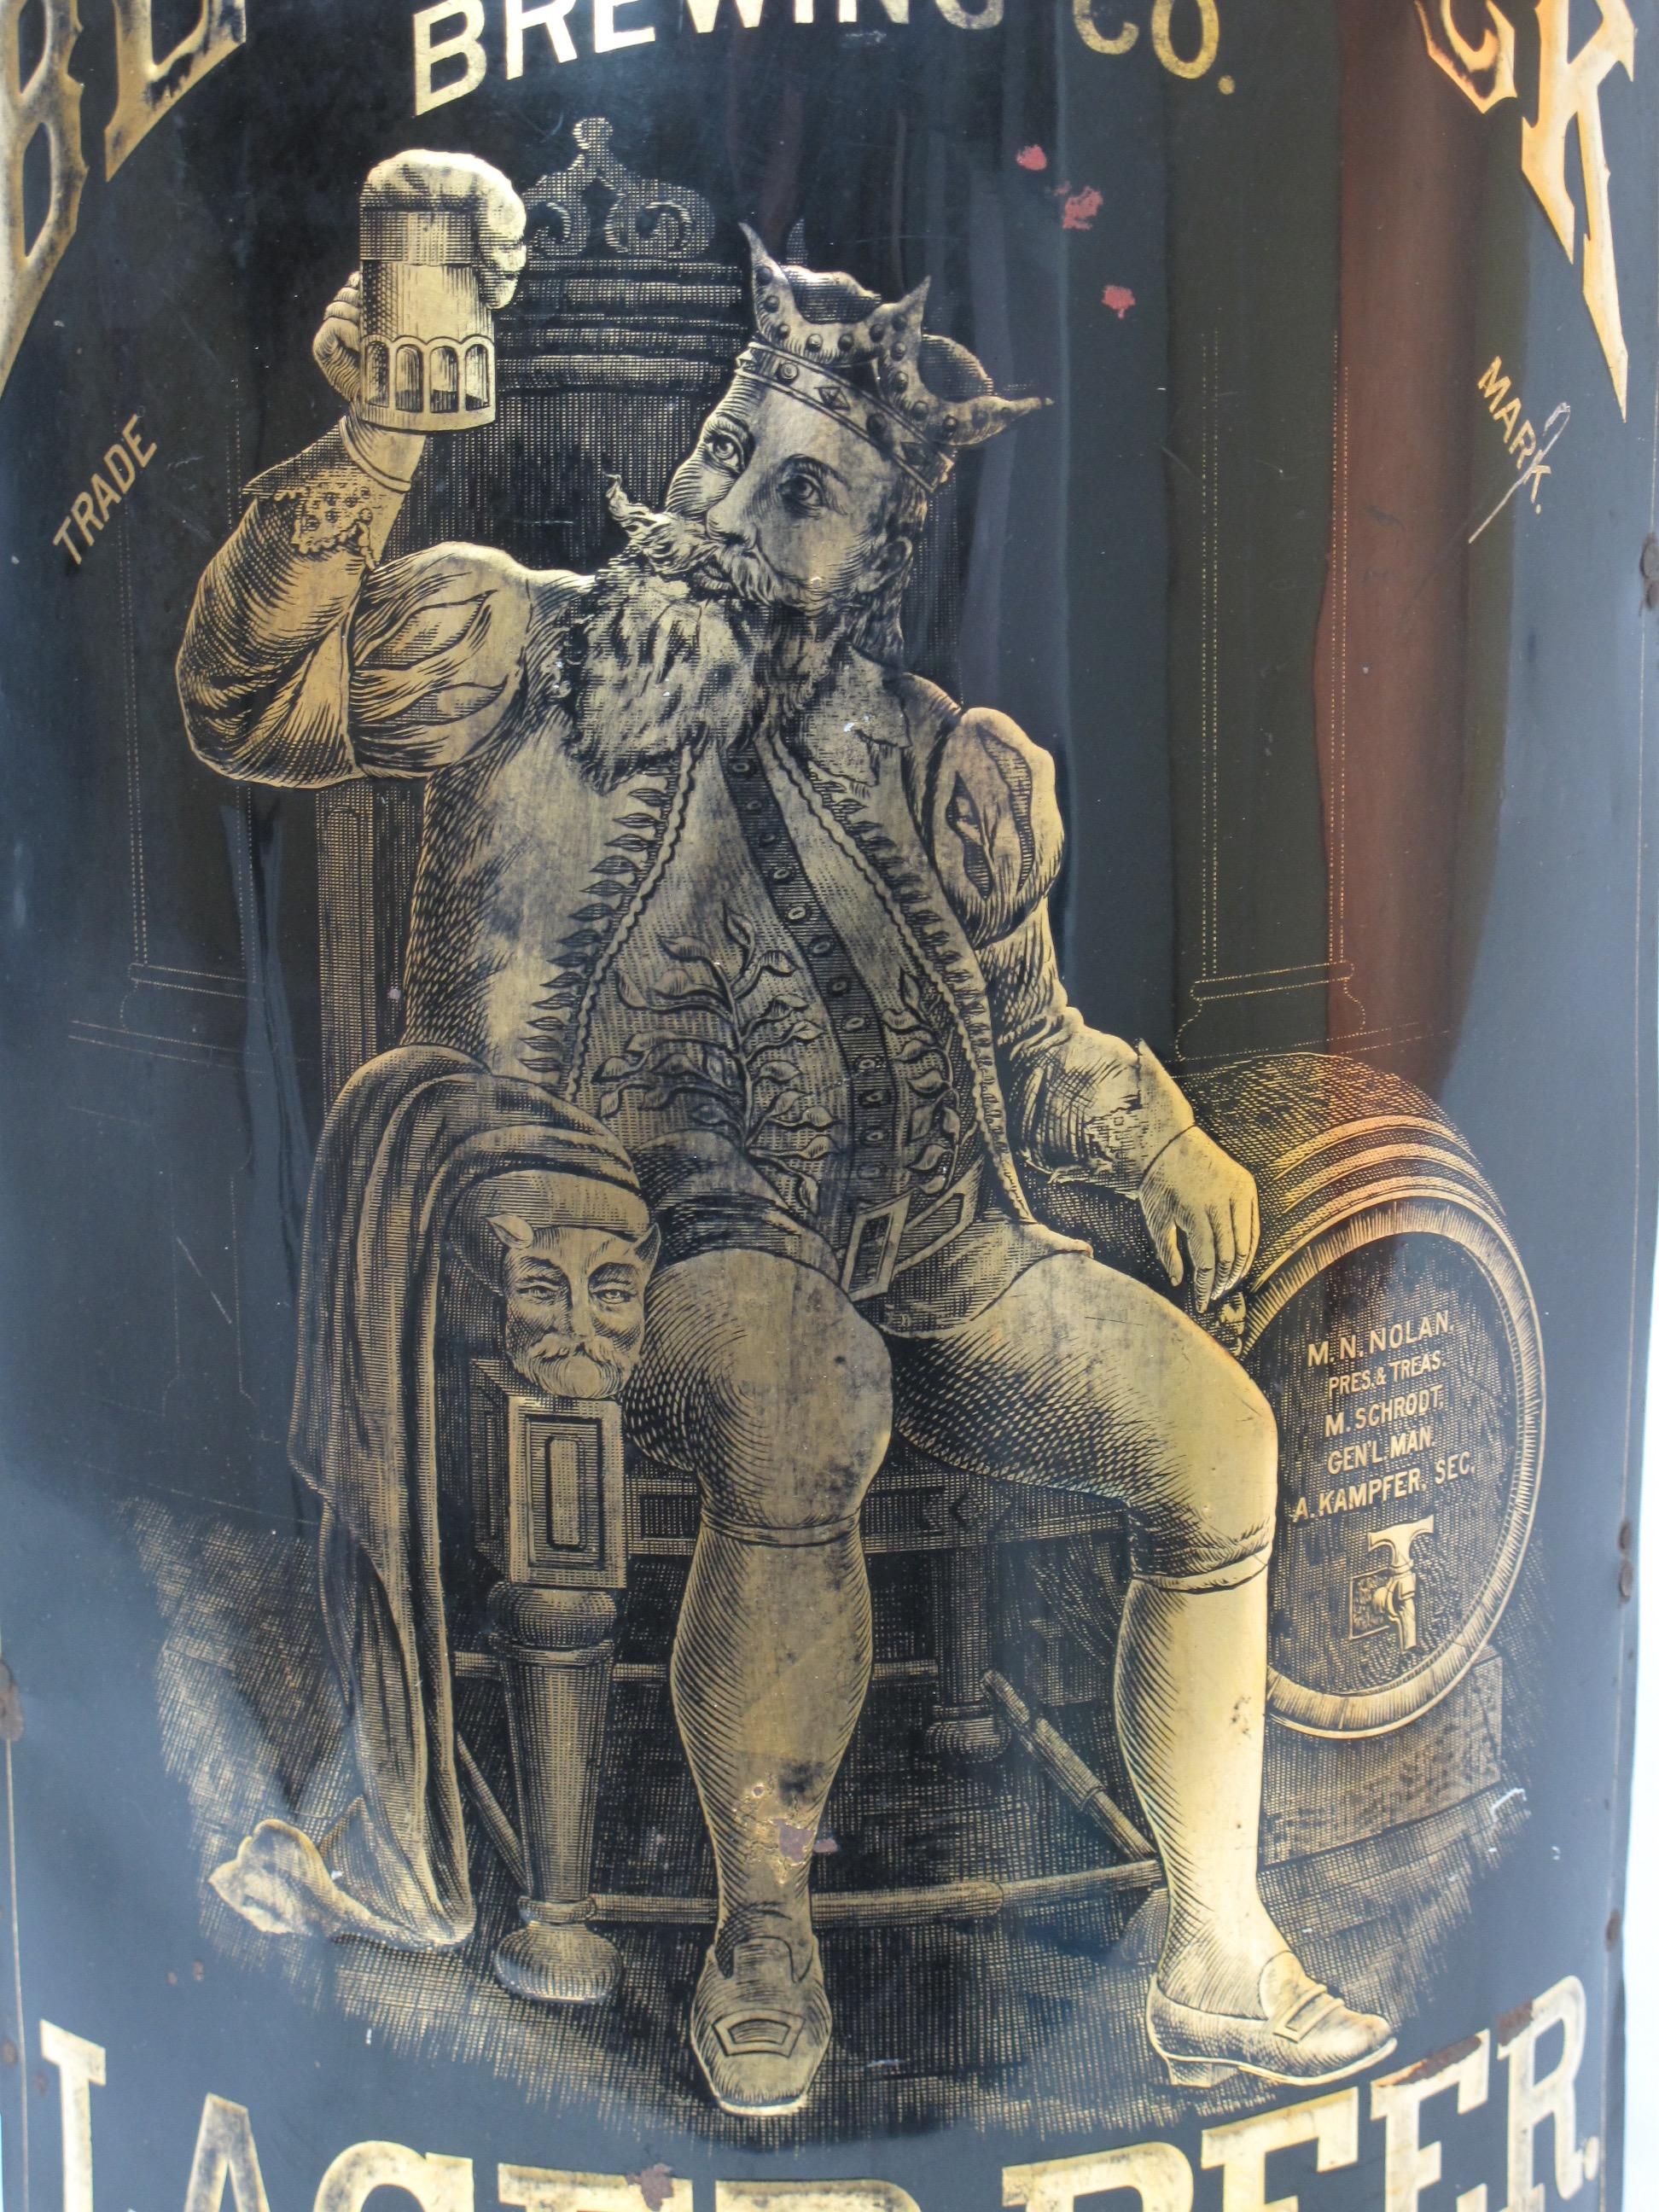 A late 19th century tin corner advertising sign for the Beverwyck Brewing Company in Albany, N.Y., featuring Gambrinus as the central image for the sign. Gambrinus is a legendary European culture hero celebrated as an icon of beer, brewing,